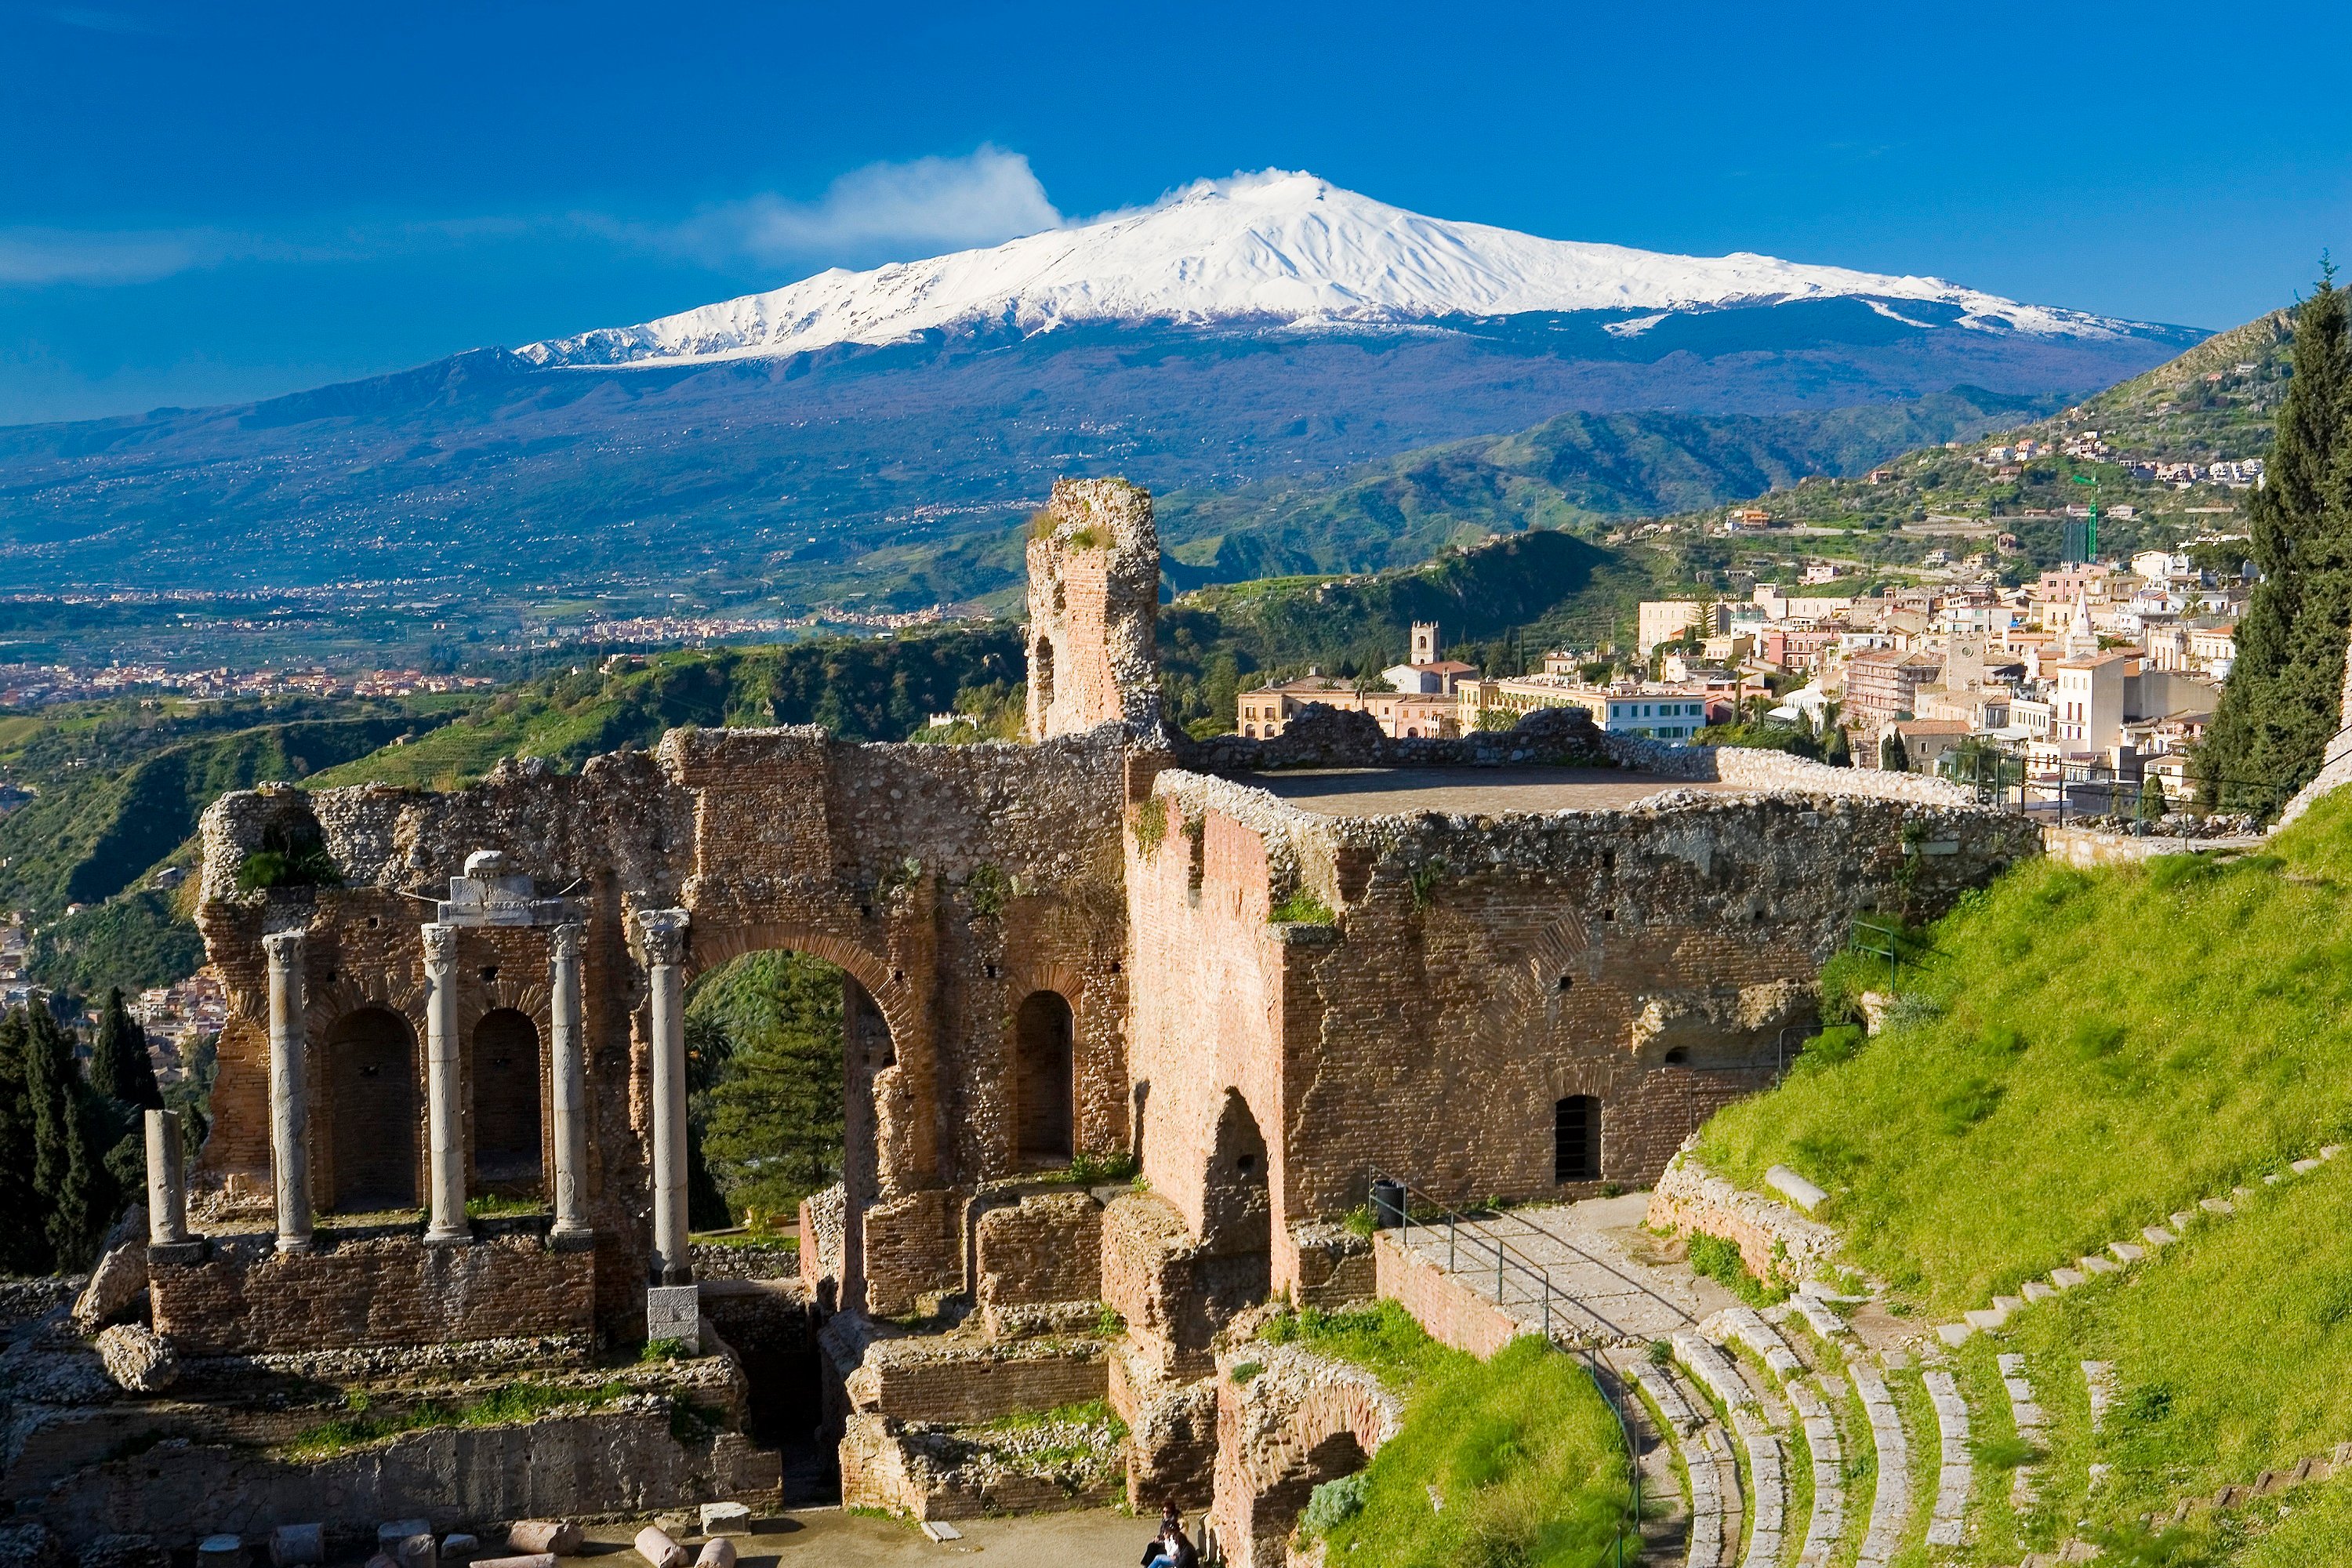 The Greek Theater in front of Mount Etna in Taormina, Sicily, Italy where 'The White Lotus' Season 2 filmed